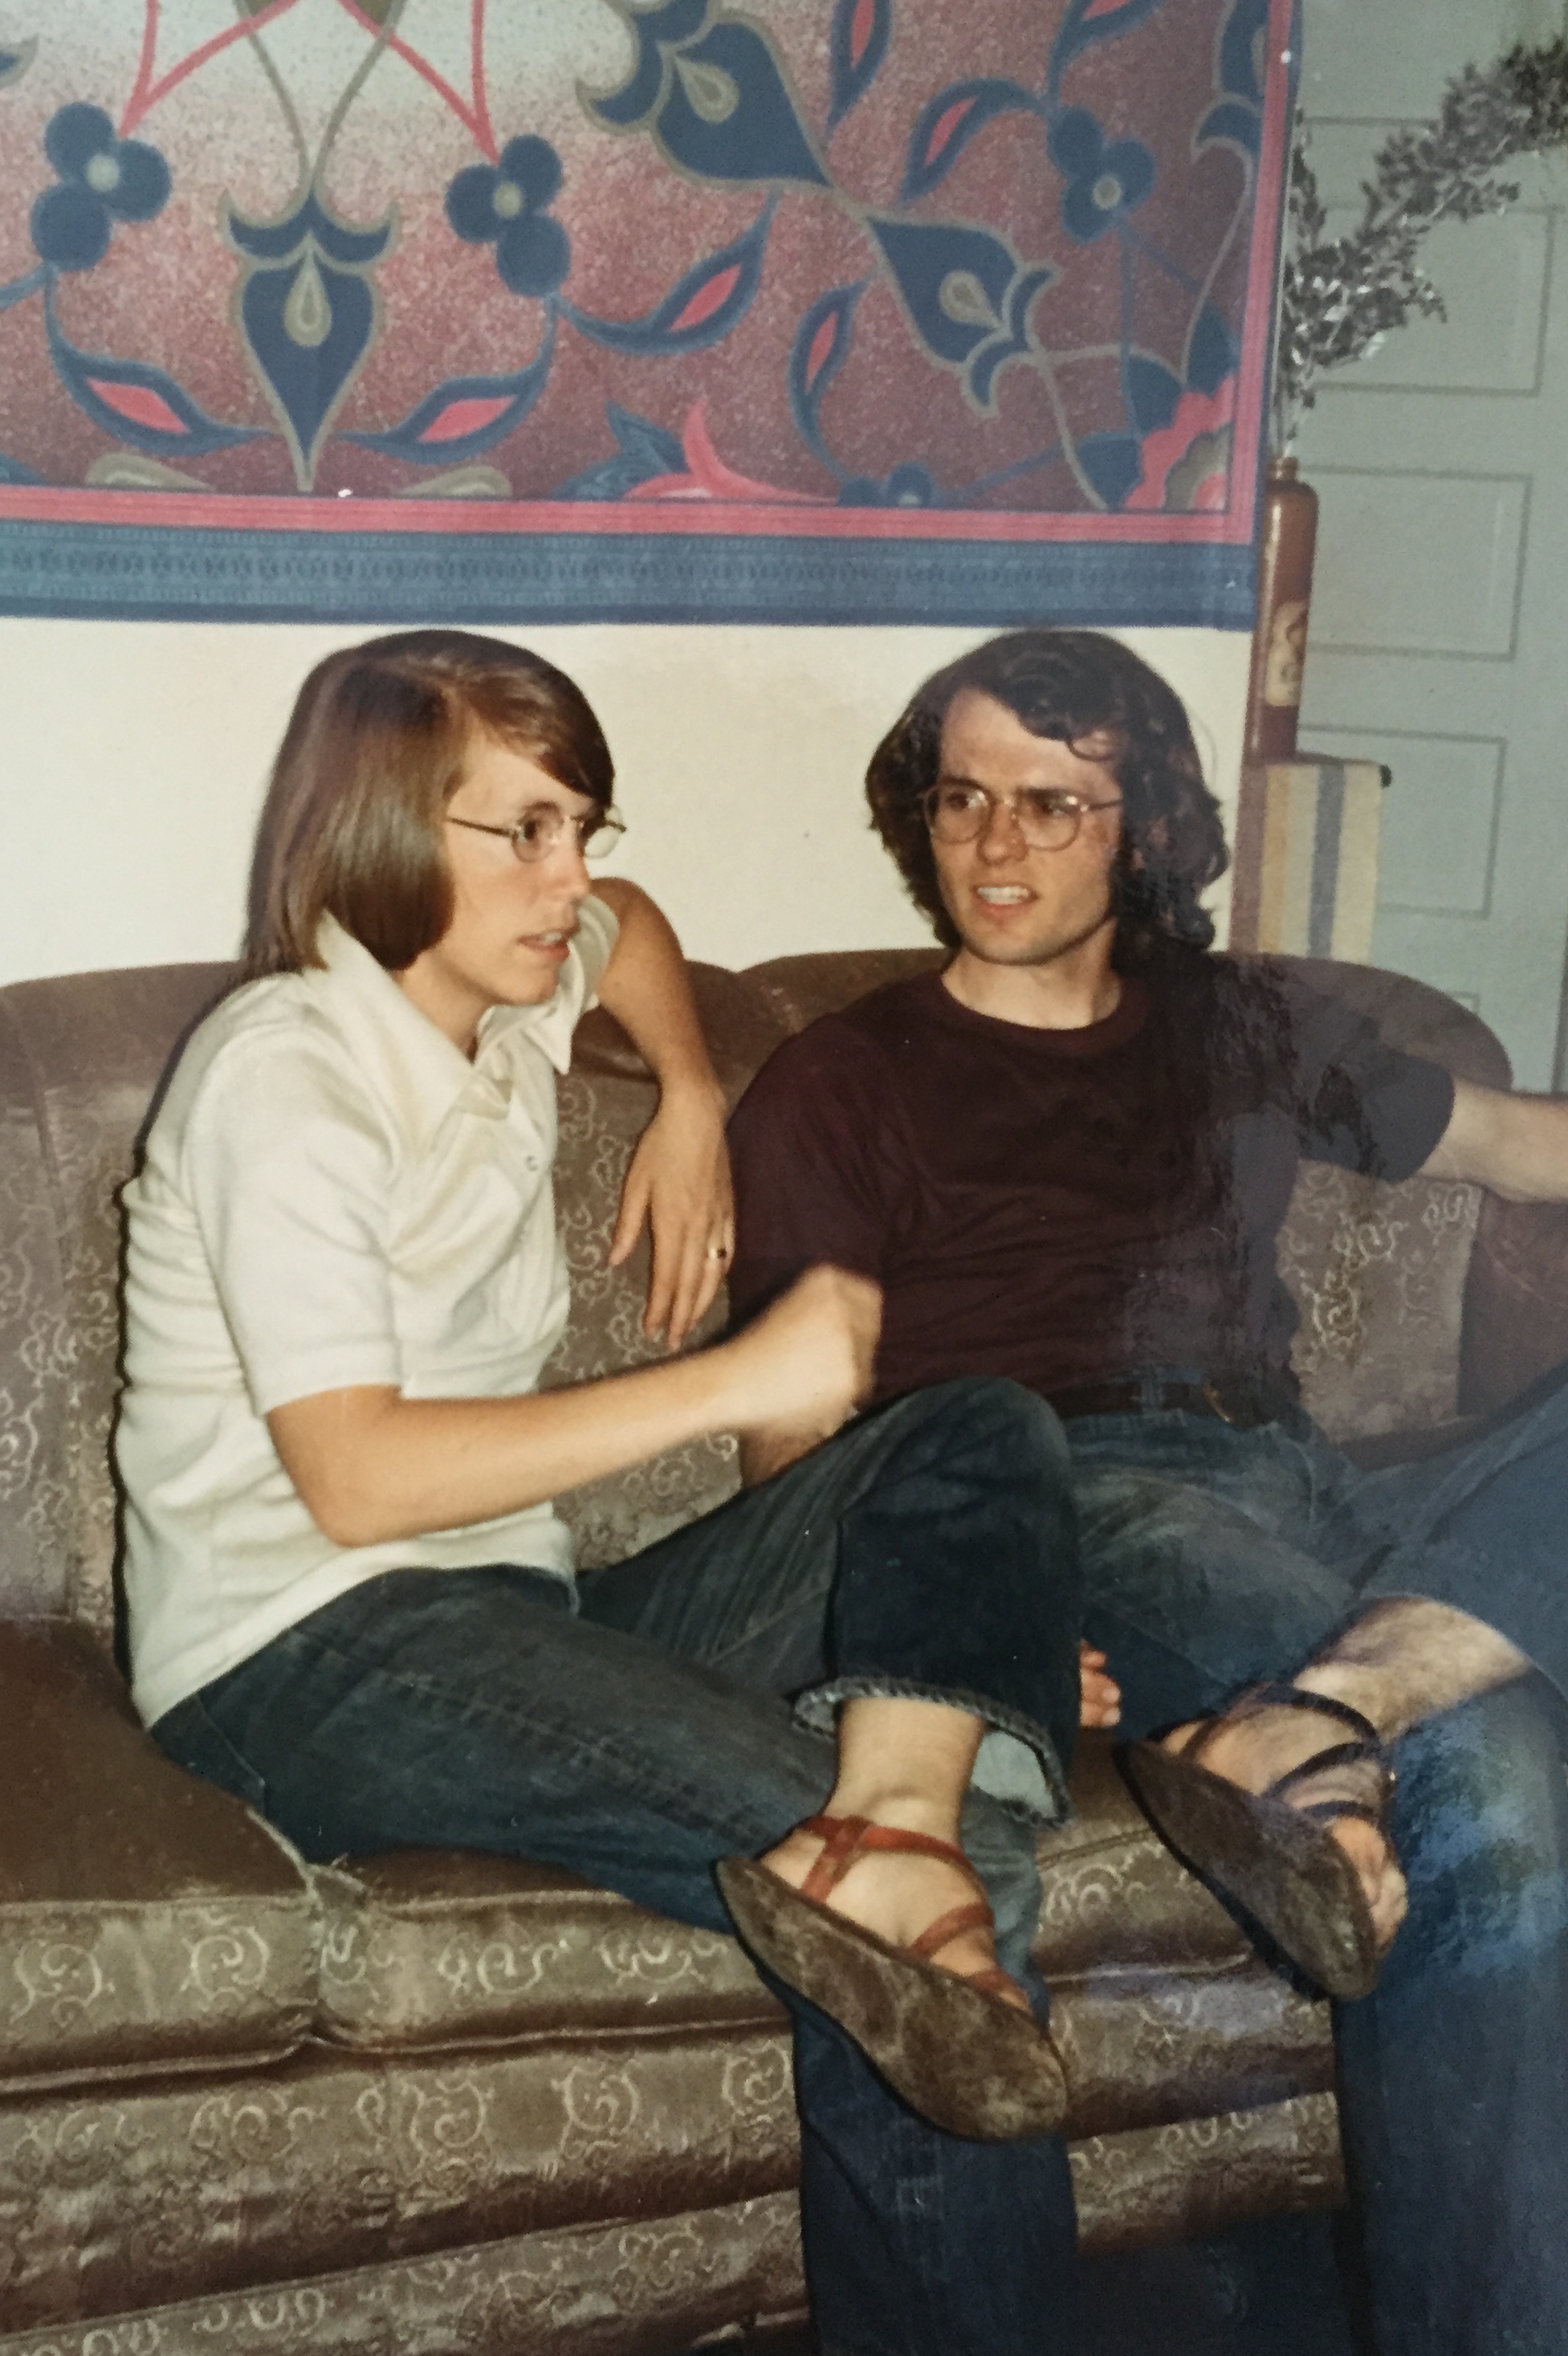 Mom &amp; Dad as earnest 70s intellectuals